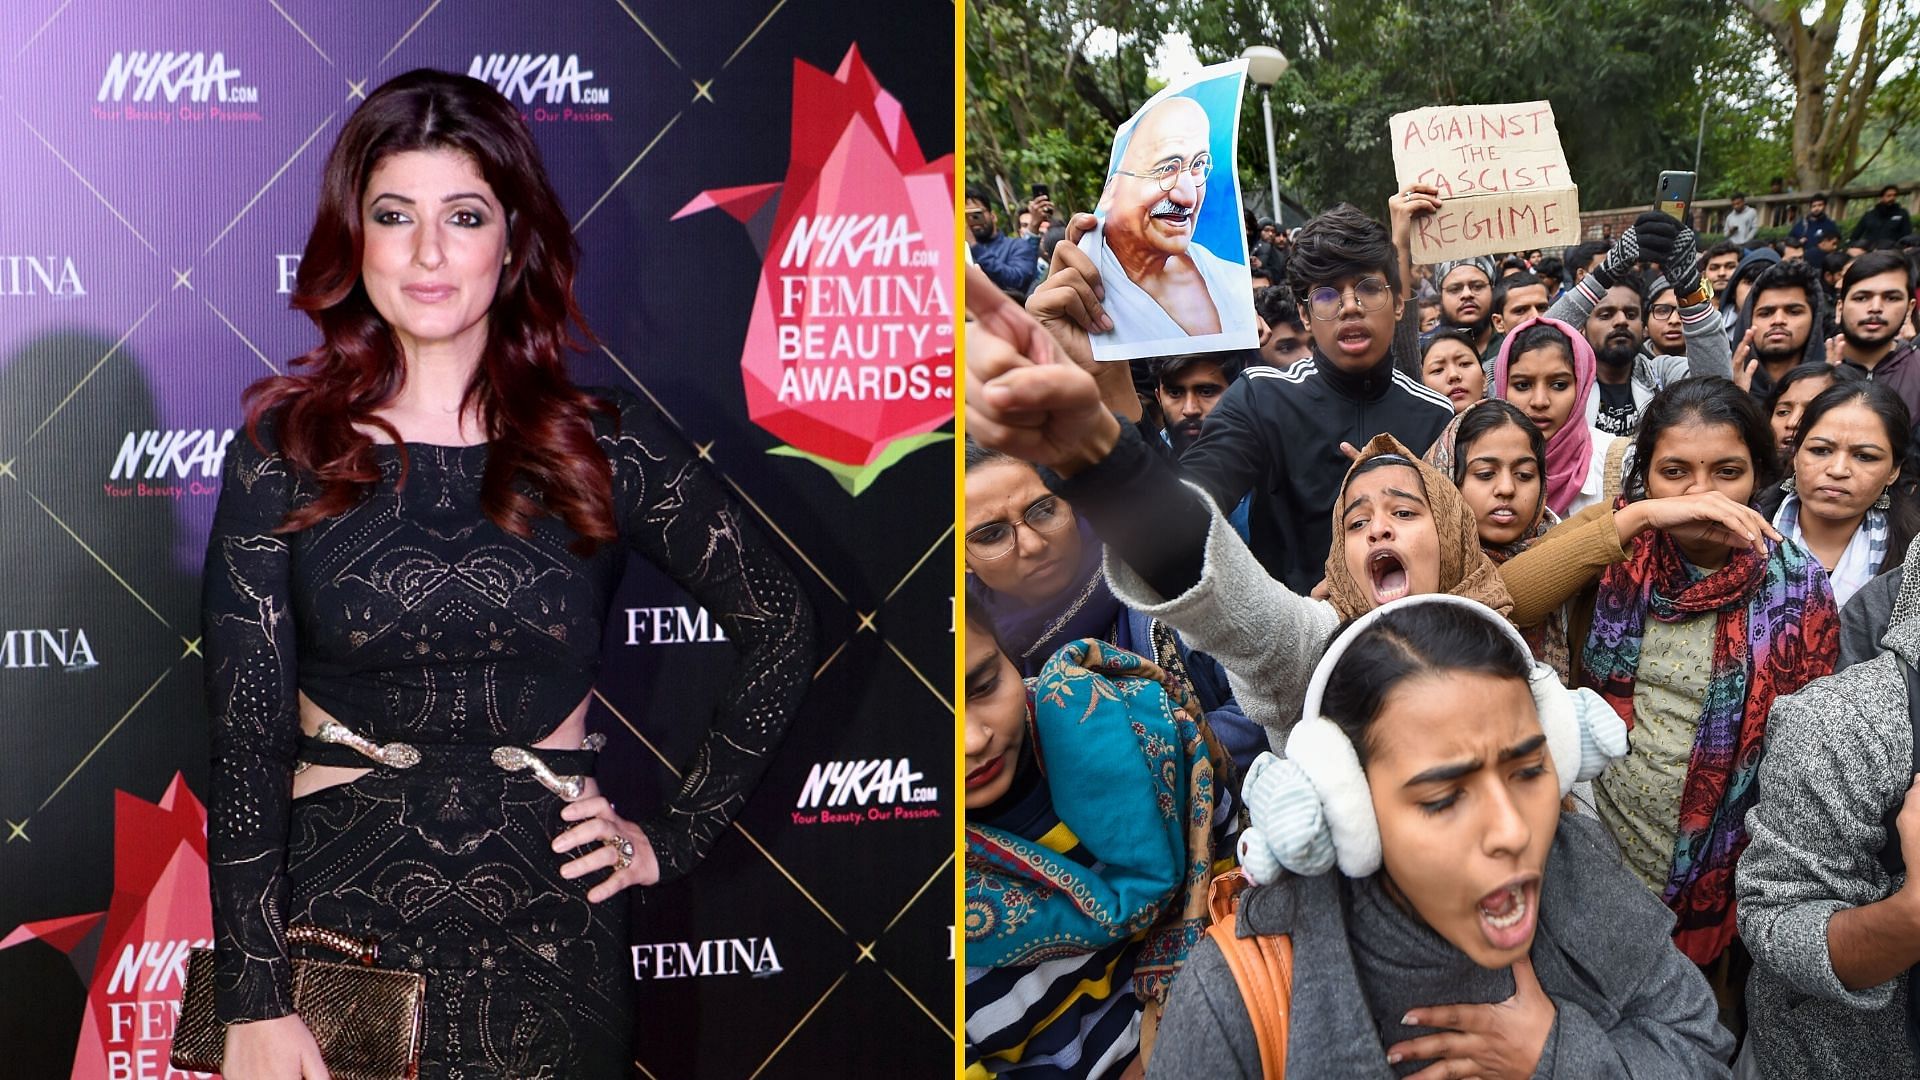 Twinkle Khanna has spoken in support of students protesting against the Citizenship Amendment Act.